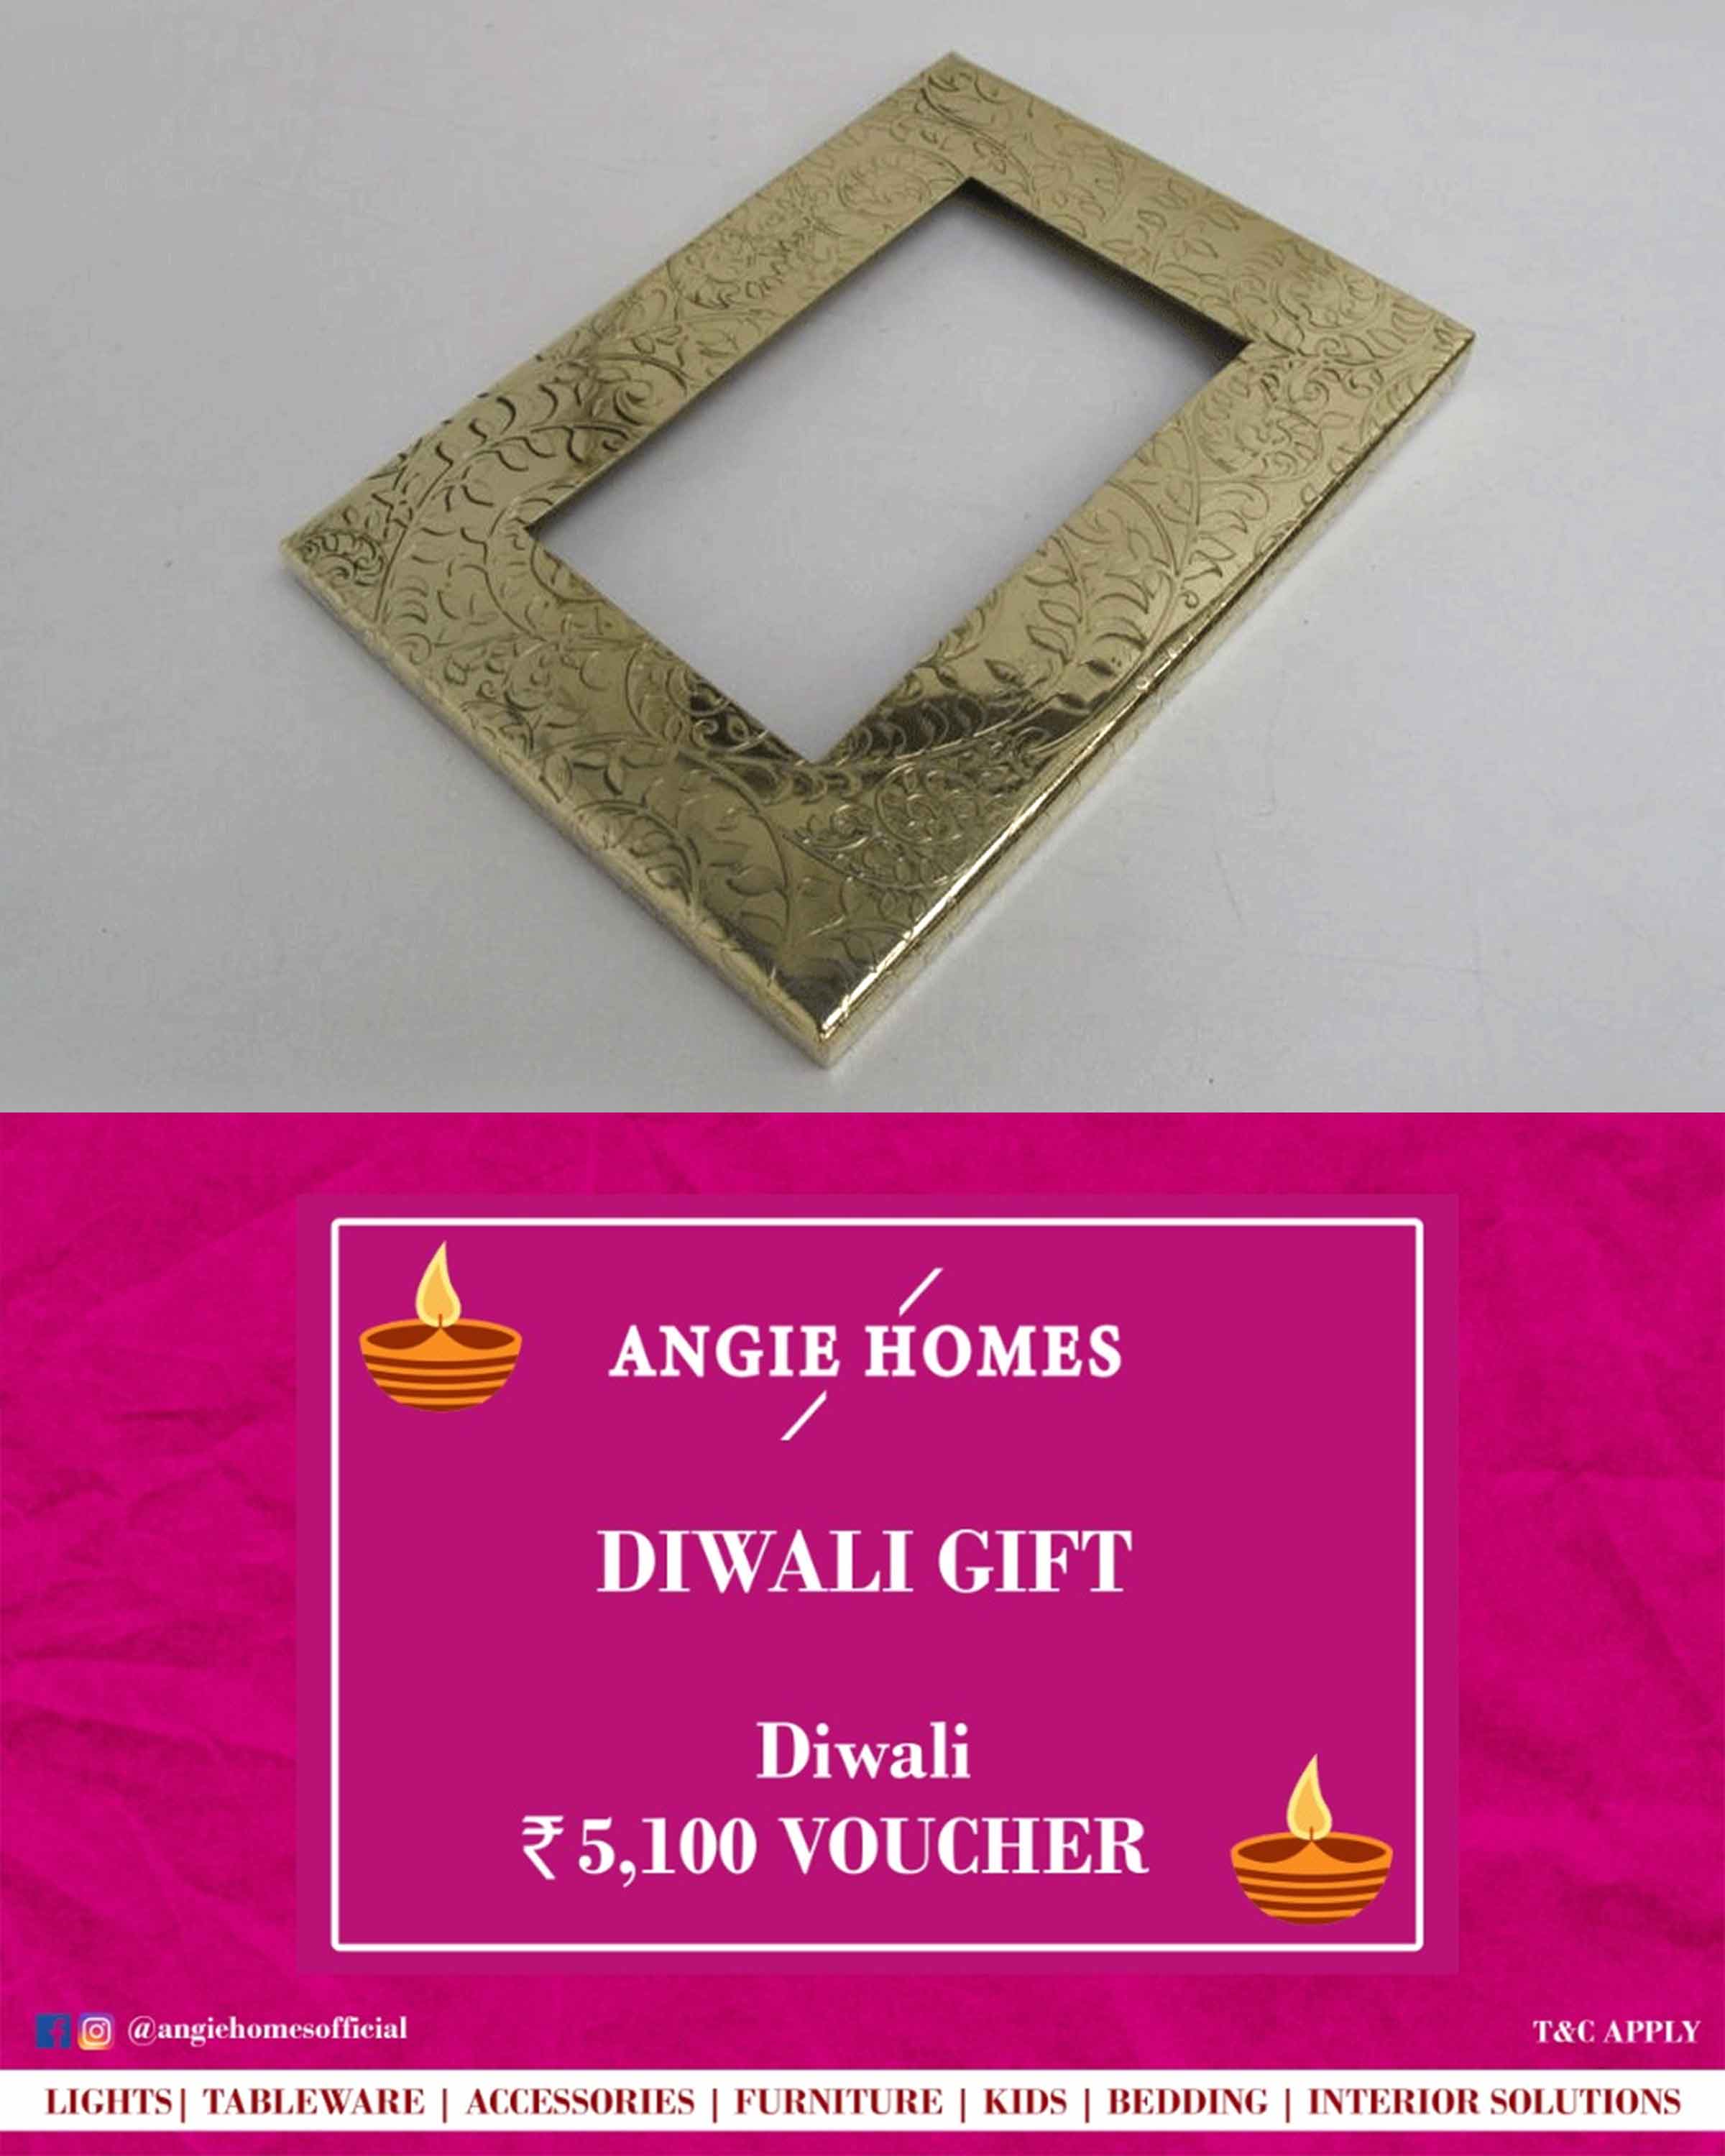 Online Diwali Gift Card Voucher for Herringbone Photo Frame | Accessories ANGIE HOMES